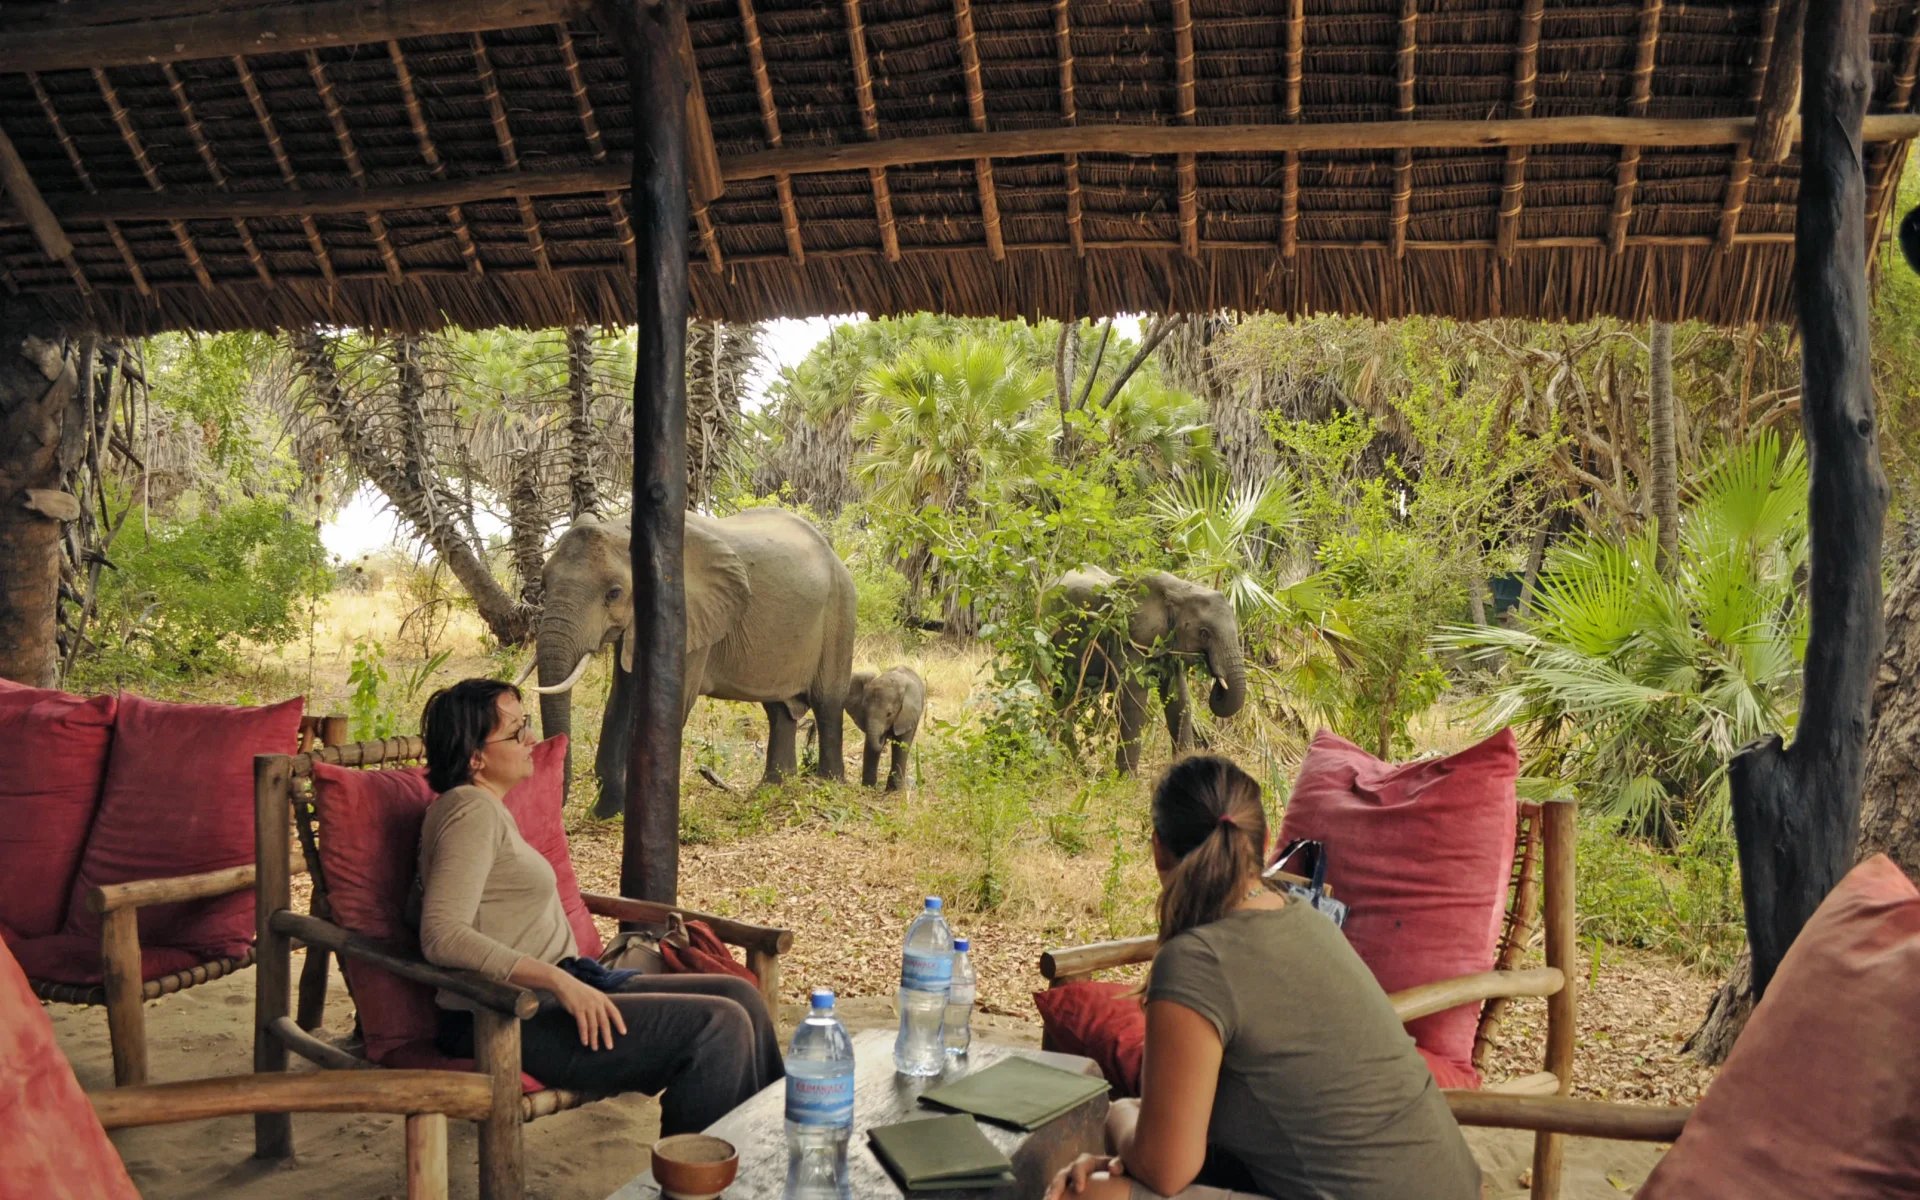 Two women gaze at a group of elephants wandering amidst foliage from the comfort of Lake Manze Camp's seating area.